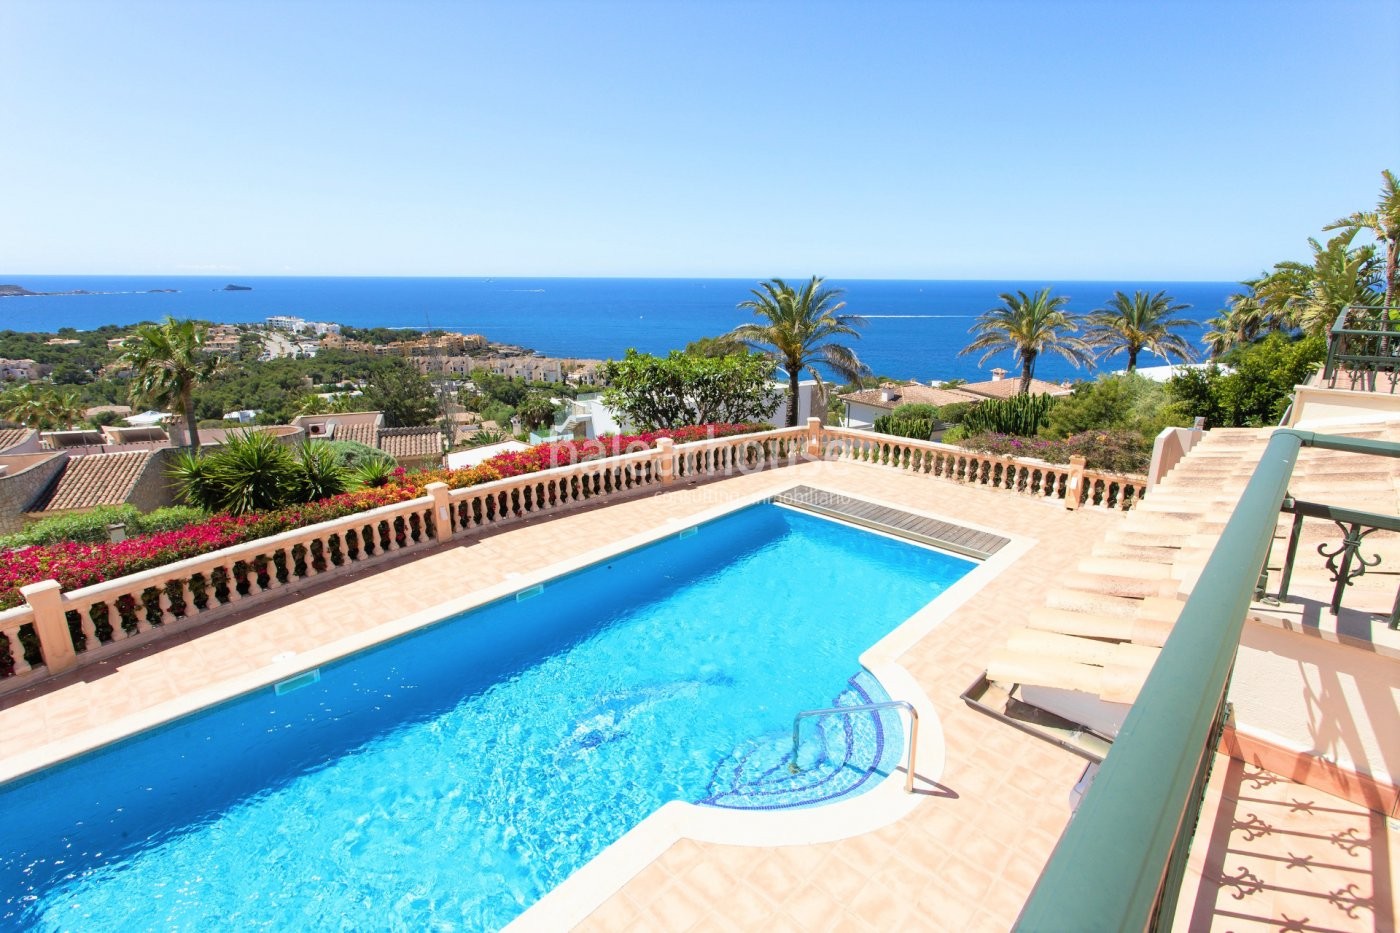 Mediterranean style villa with spectacular views in top location